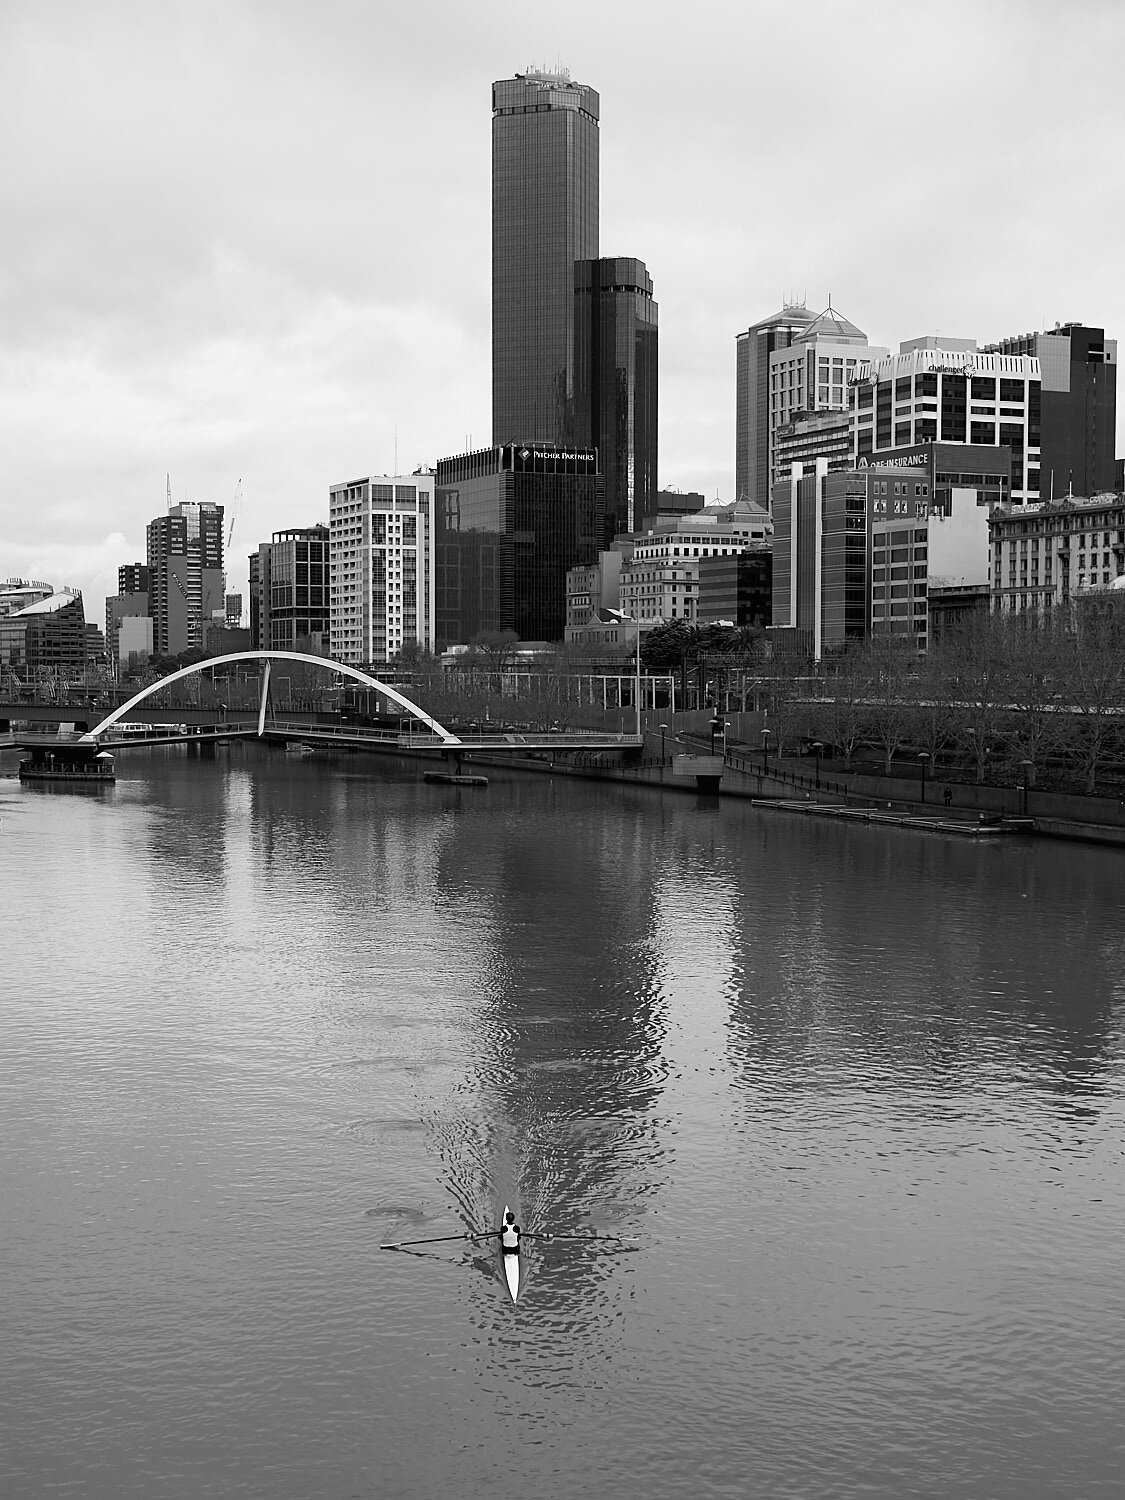 Rower on the Yarra